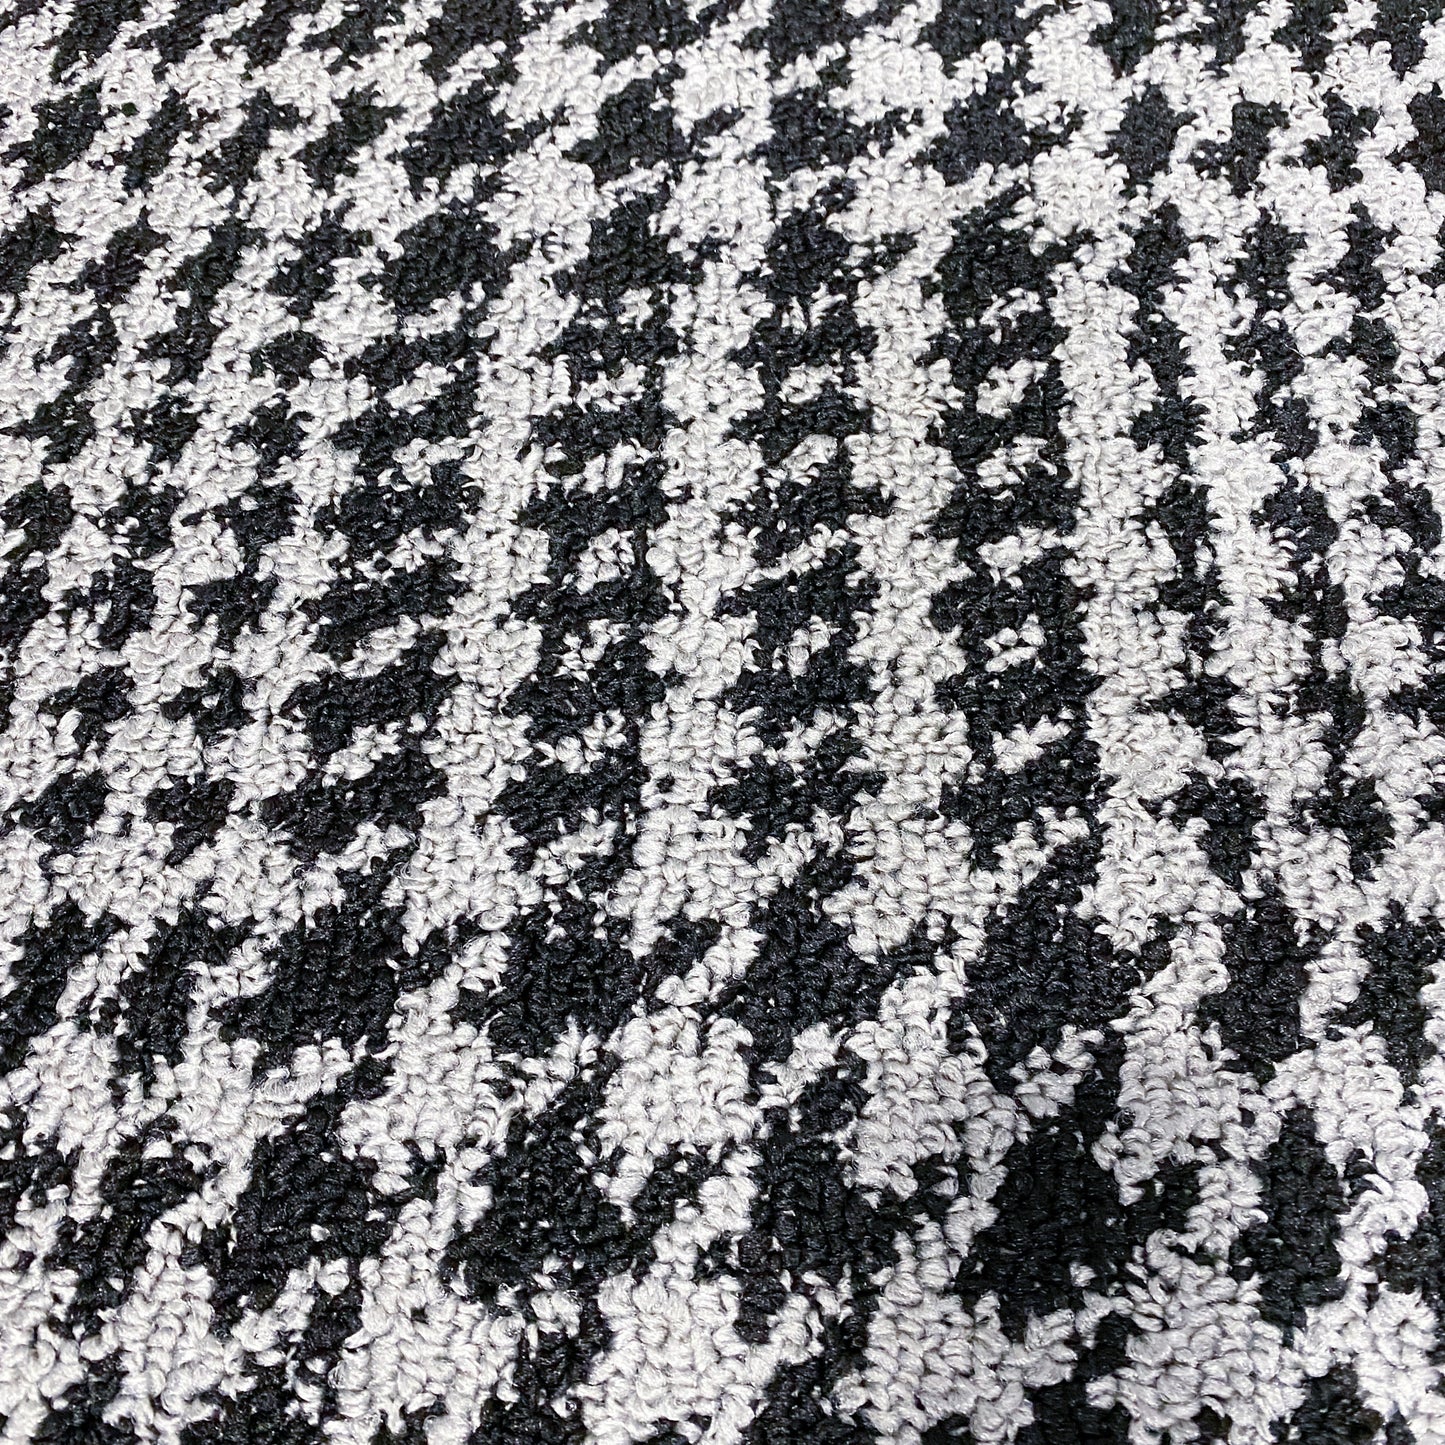 Hounds Tooth Rug